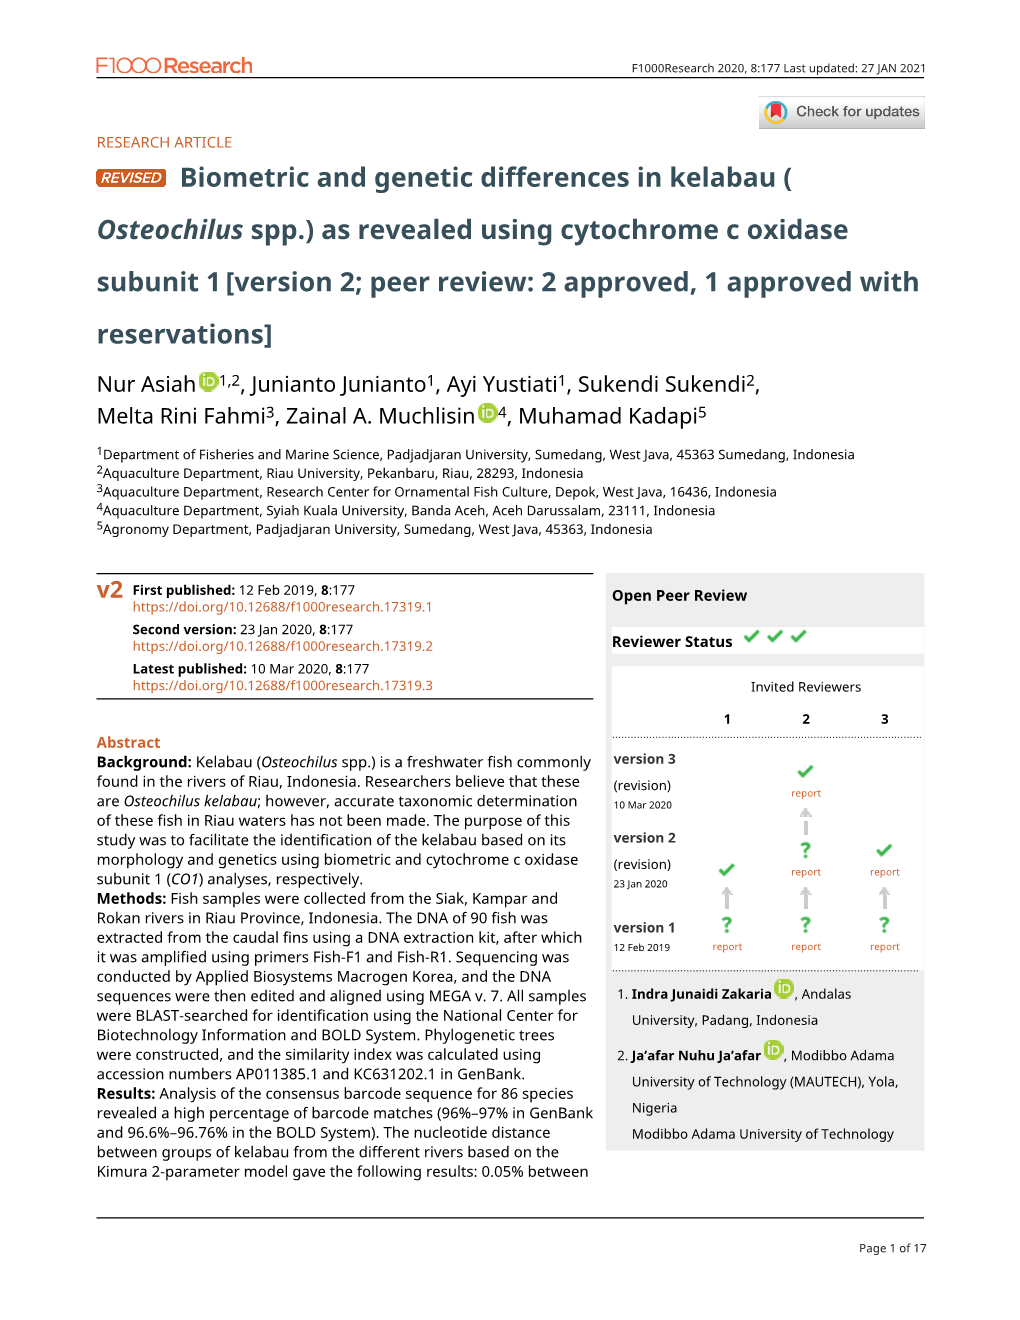 Biometric and Genetic Differences in Kelabau ( Osteochilus Spp.)